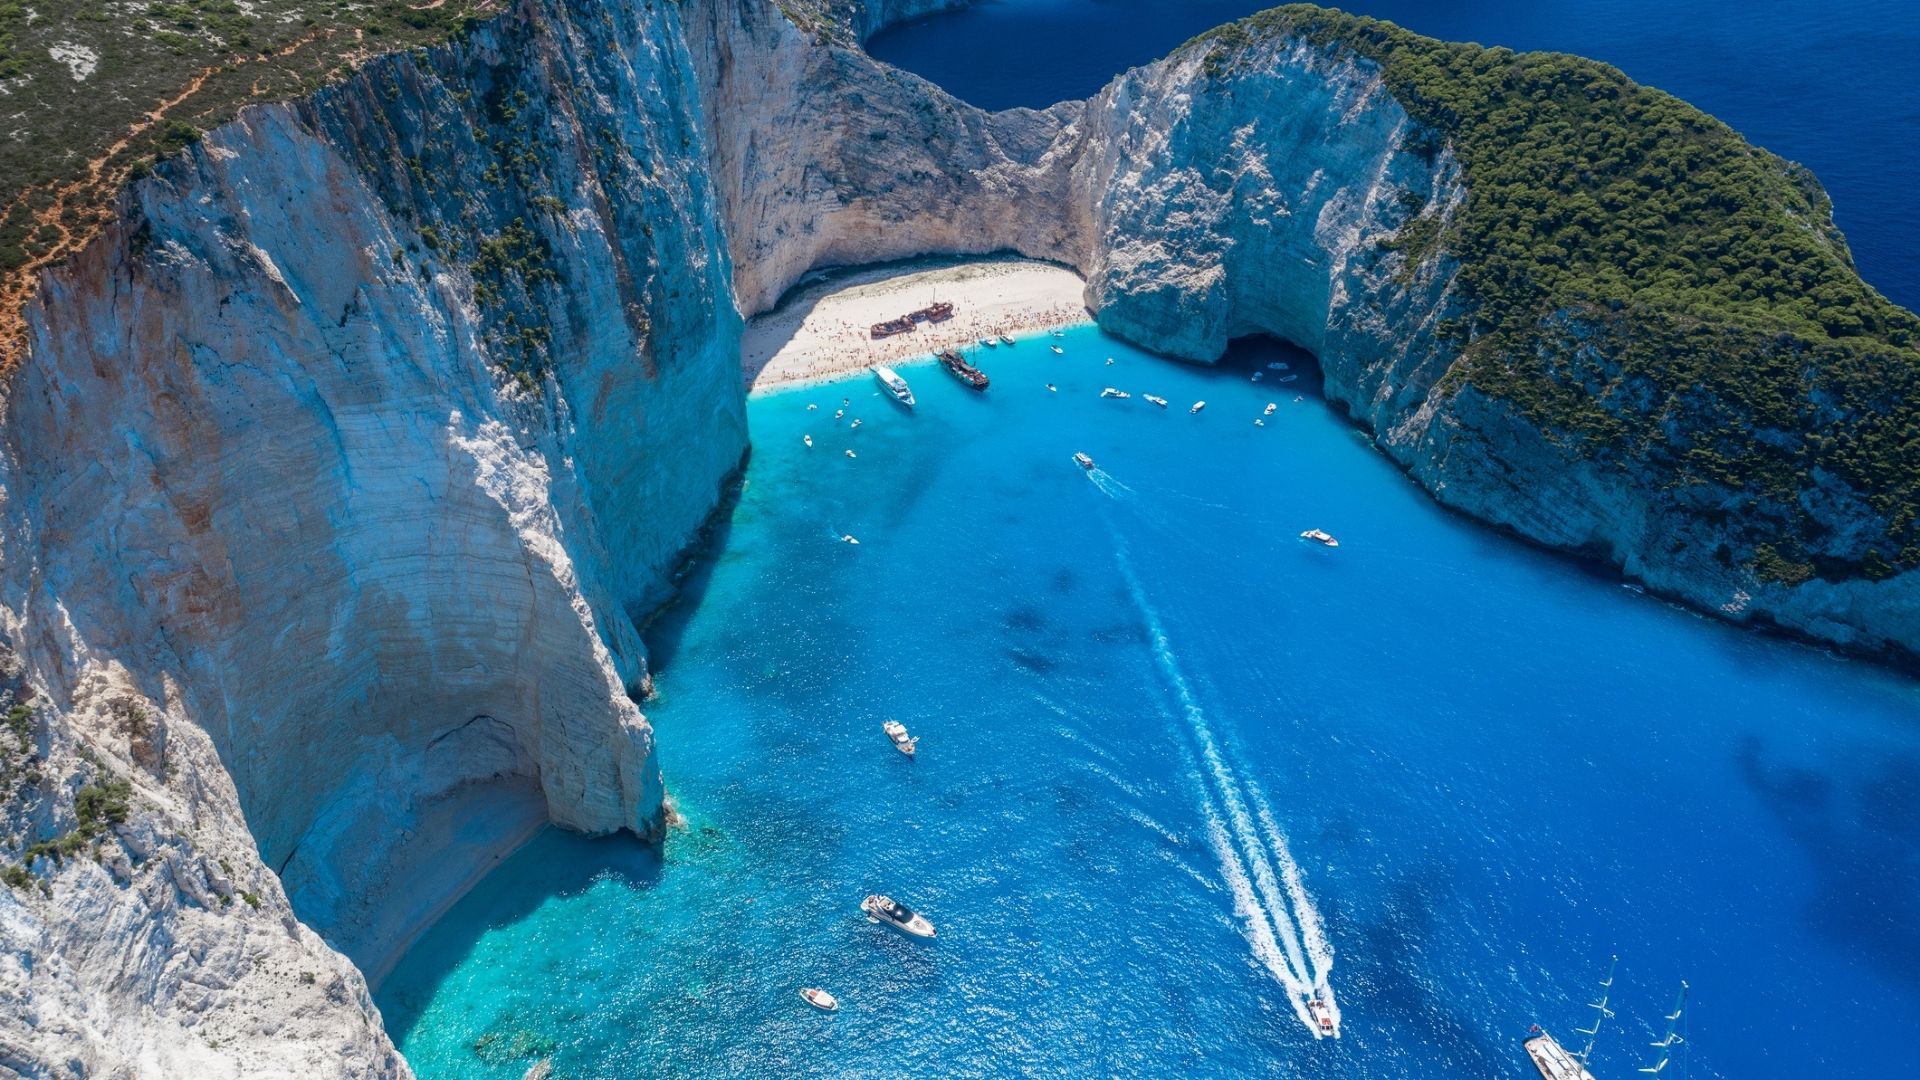 <p>                     Zakynthos island is known for its wild nightlife, but don't be deterred by its party reputation, as the island offers so much more. Its airport is small but extremely well-served, meaning you can often take advantage of holiday deals on offer.                    </p>                                      <p>                     Once again, renting a car is advisable to really scale the island and experience its breathtaking views in their full glory. But if you can't, consider staying in Zante Town - the island's capital, where the central bus station is located. Full of picturesque Venetian-style houses and buildings, the town is the cultural hub of the island. But to really immerse yourself in the island culture, head to Vasilikos, the village and community which is located around 15 kilometers south of the town. This part of the island is decidedly sleepy, making it one of the best European vacations for families but solo travelers or couples would enjoy it just as much. While away the day on Gerakas Beach, a long, golden beach on the southern tip of the peninsula, home to the famous Loggerhead Turtles who nest in protected areas of the beaches. Banana beach, the biggest beach on the island is also located nearby. A long, wide beach with sparkling and shallow waters, you can also take part in an array of watersports here.                    </p>                                      <p>                     If you have a car, take a 15-minute ride to Porto Mela, a taverna perched on Dafni beach that serves up all the favorites plus a selection of fresh seafood. If you're feeling adventurous, try rabbit in red sauce (kouneli stifado) - one of the island's signature dishes. Like most Greek cuisine, it's delicious, messy, and entirely unpretentious. Most restaurants will have different stifado options with other meats on offer too. Wash it down with a carafe of local wine - the island is home to many large vineyards and it's common for families to produce their own.                   </p>                                      <p>                     <strong>Top tip: </strong>While the south is rich with nature, beaches, and cuisine, don't leave Zante before visiting the north end of the island where the famous Navagia beach is located. Otherwise known as shipwreck beach, the remains of the MV Panagiotis ship have been planted on the white sand since the ship sunk in 1982. It's accessible only by boat, but avoid booking a boat to specifically go there - instead find an itinerary that includes Navagia beach as part of an island tour. In most cases, you'll pay the same price but see multiple destinations.                    </p>